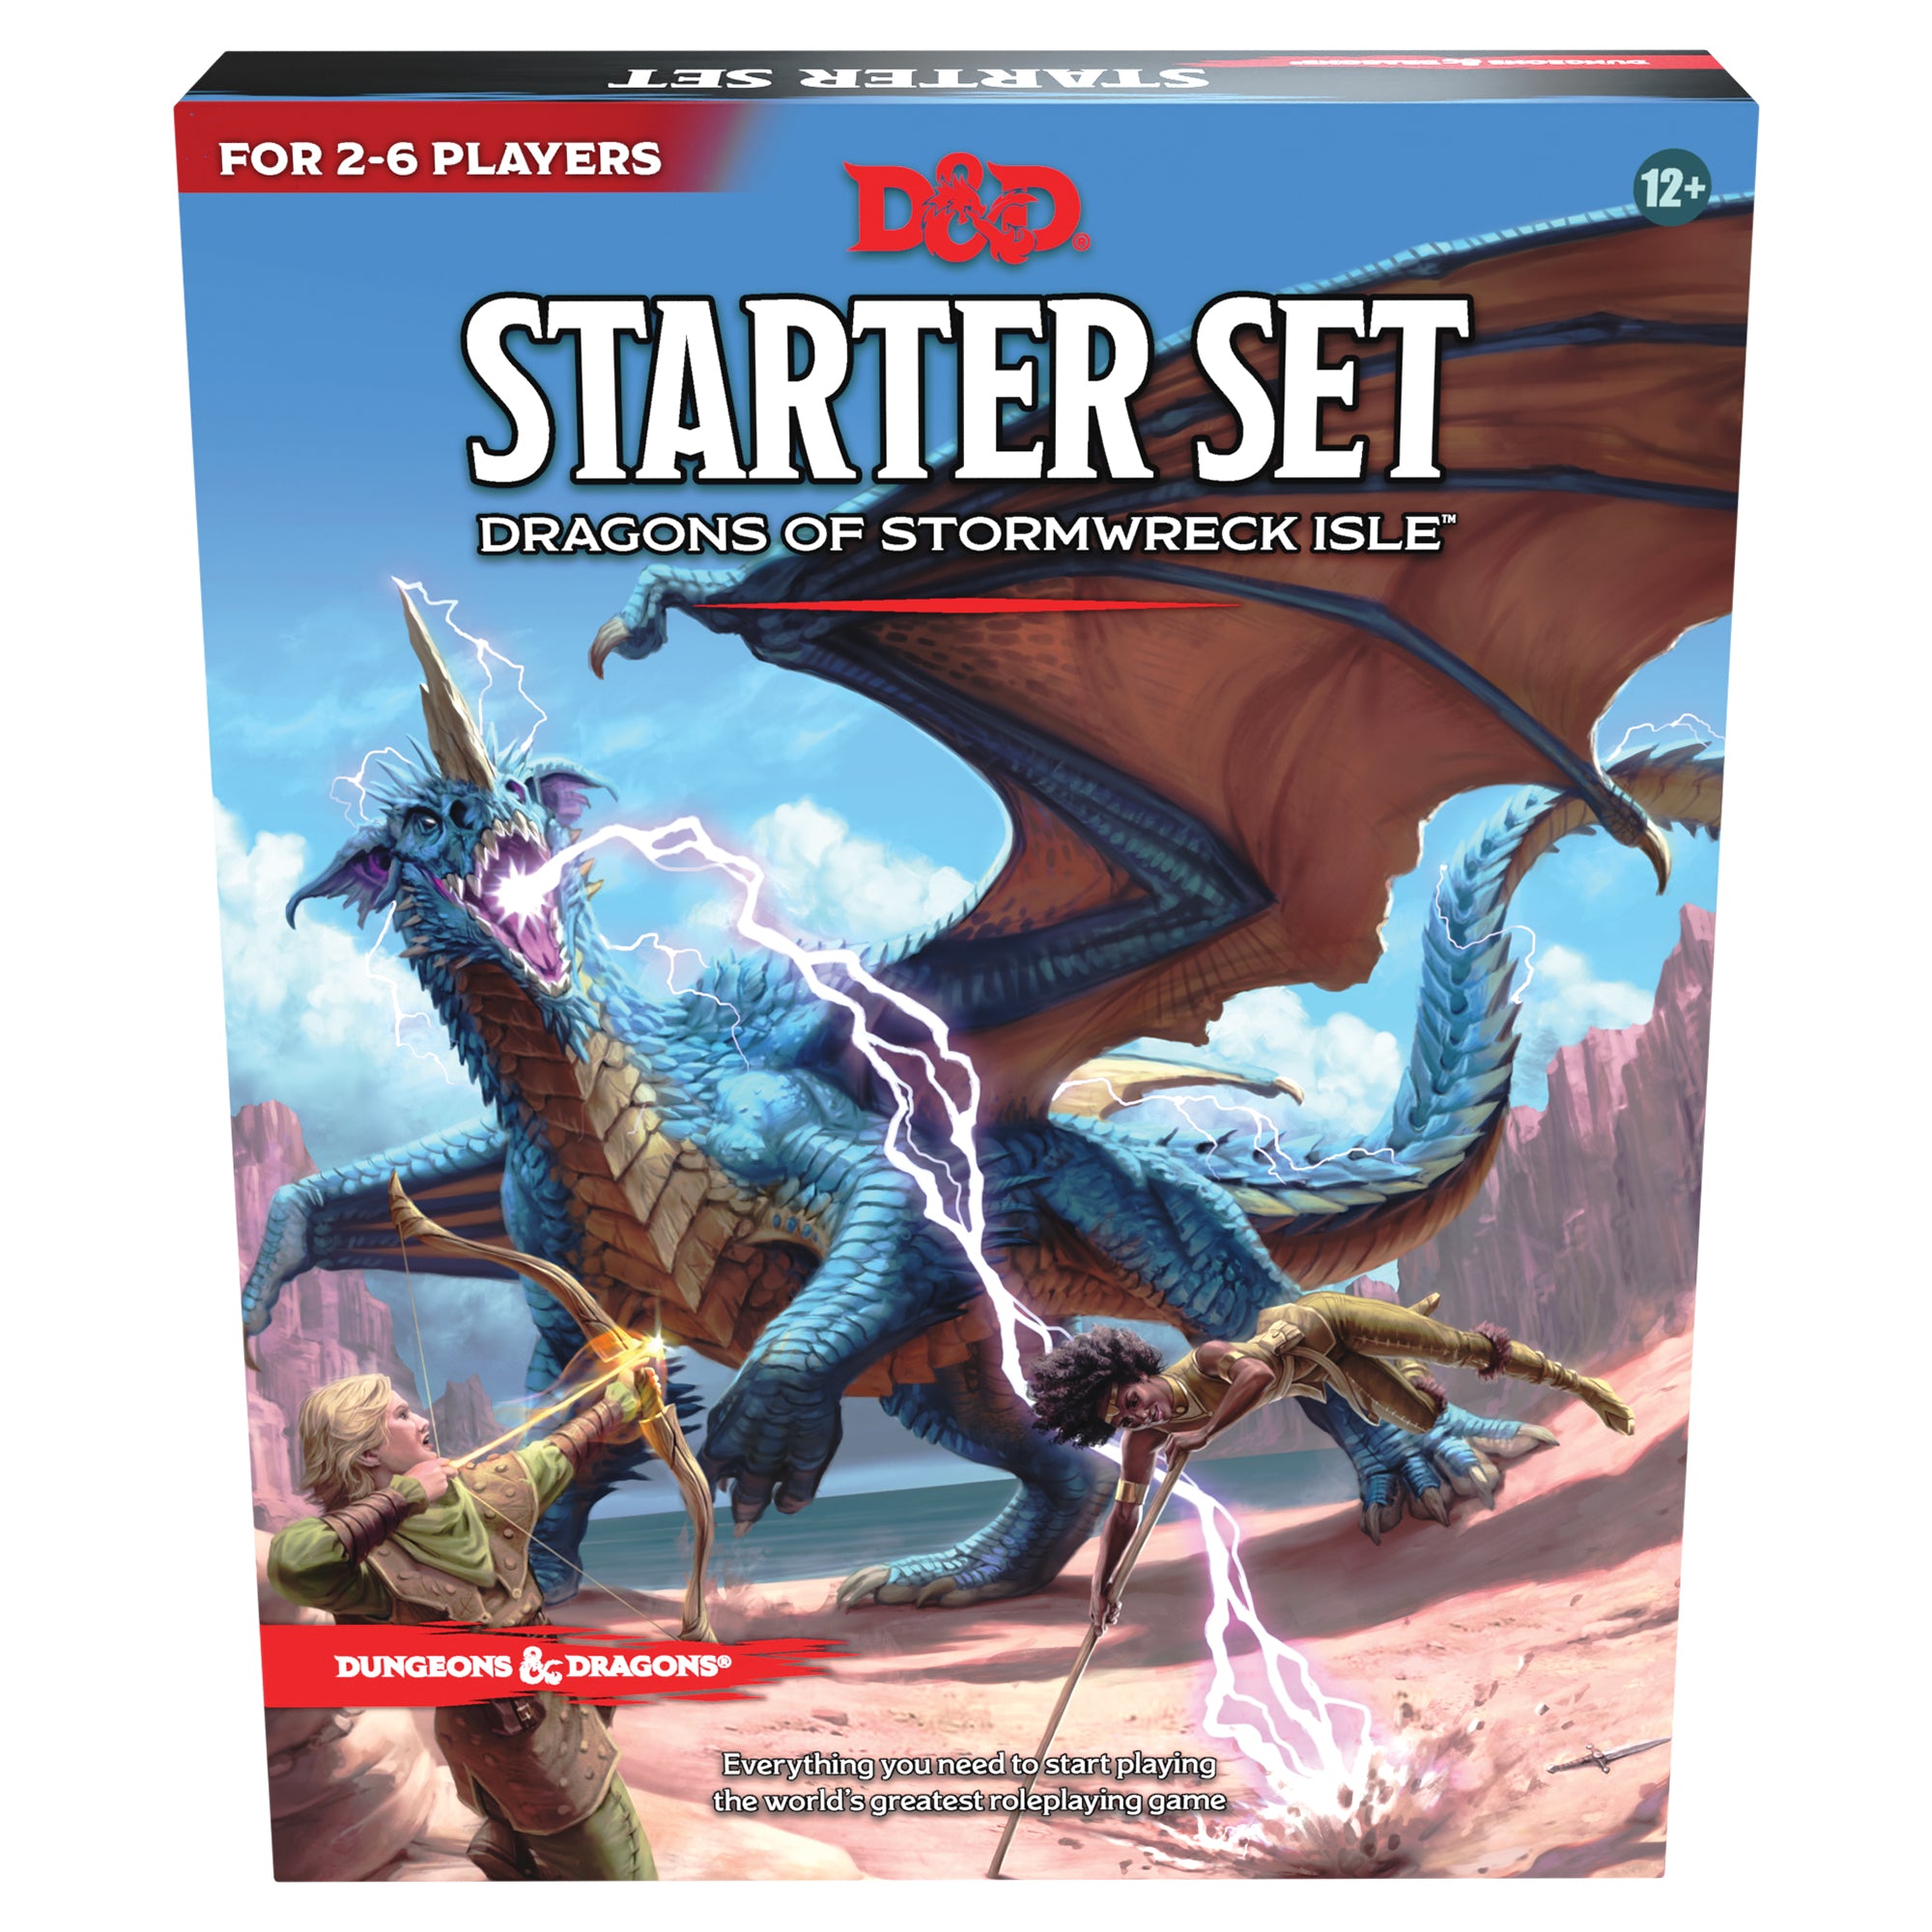 Dungeons and Dragons RPG: Starter Set Dragons od Stormwreck Isle - Bards & Cards